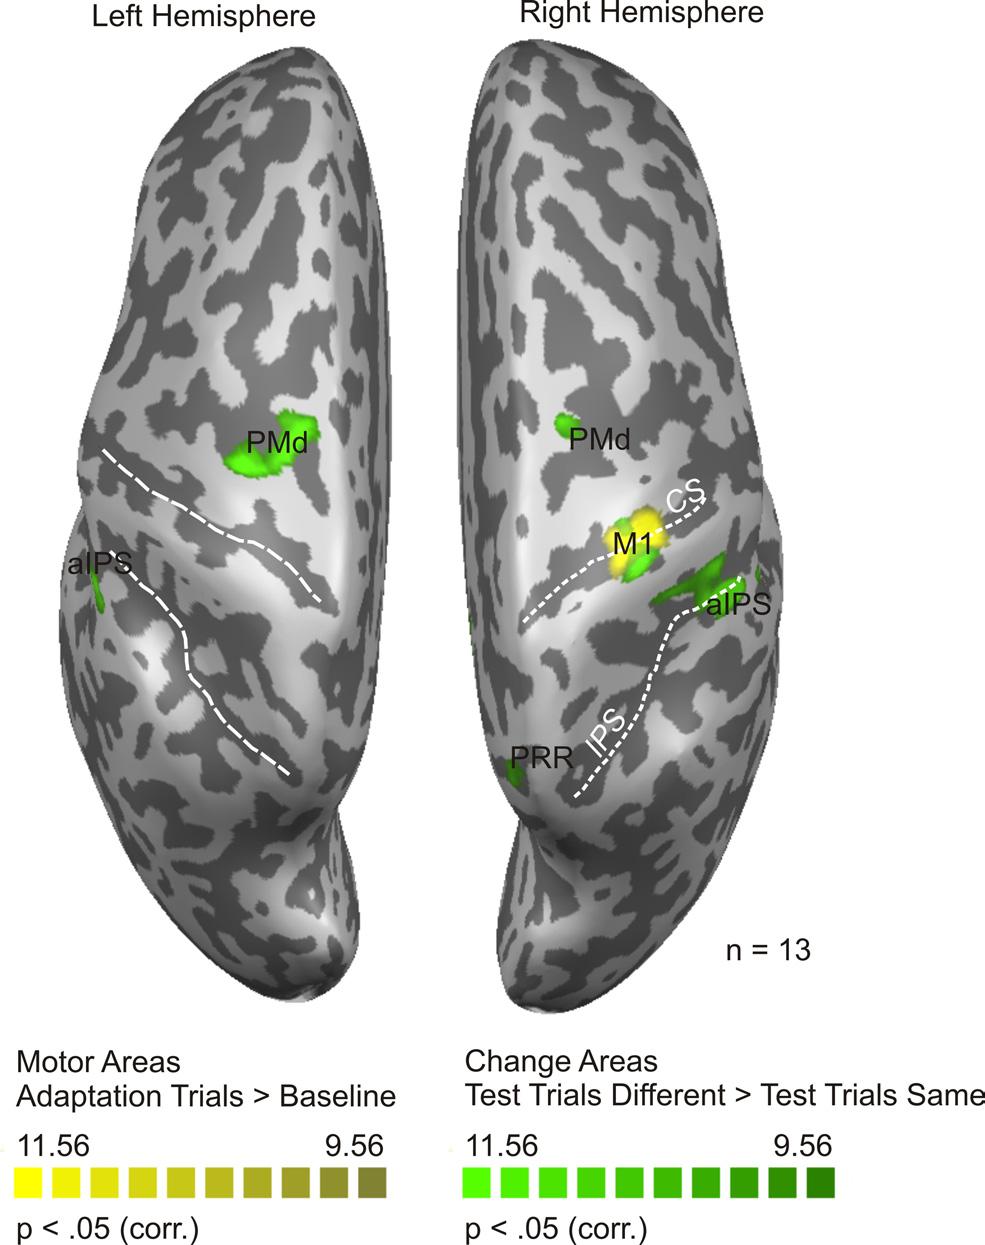 13494 J. Neurosci., October 6, 2010 30(40):13488 13498 Fabbri et al. Directional Tuning in Humans Figure 7. Strength of directional selectivity in ROIs in experiment 1.